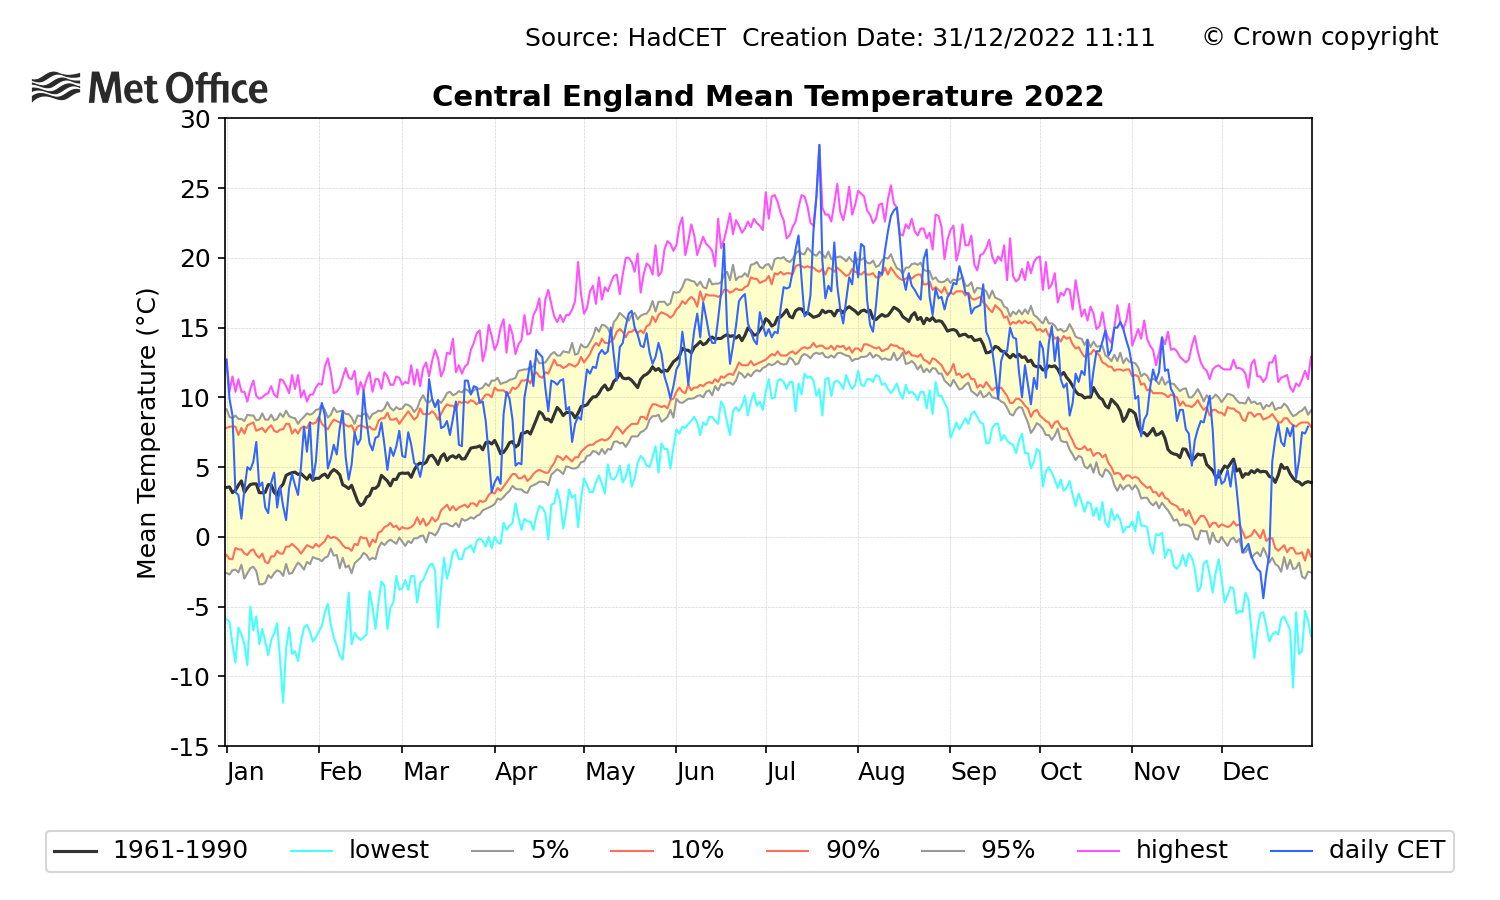 https://www.metoffice.gov.uk/hadobs/hadcet/graphs/2022/daily_meantemp_cet_2022.png